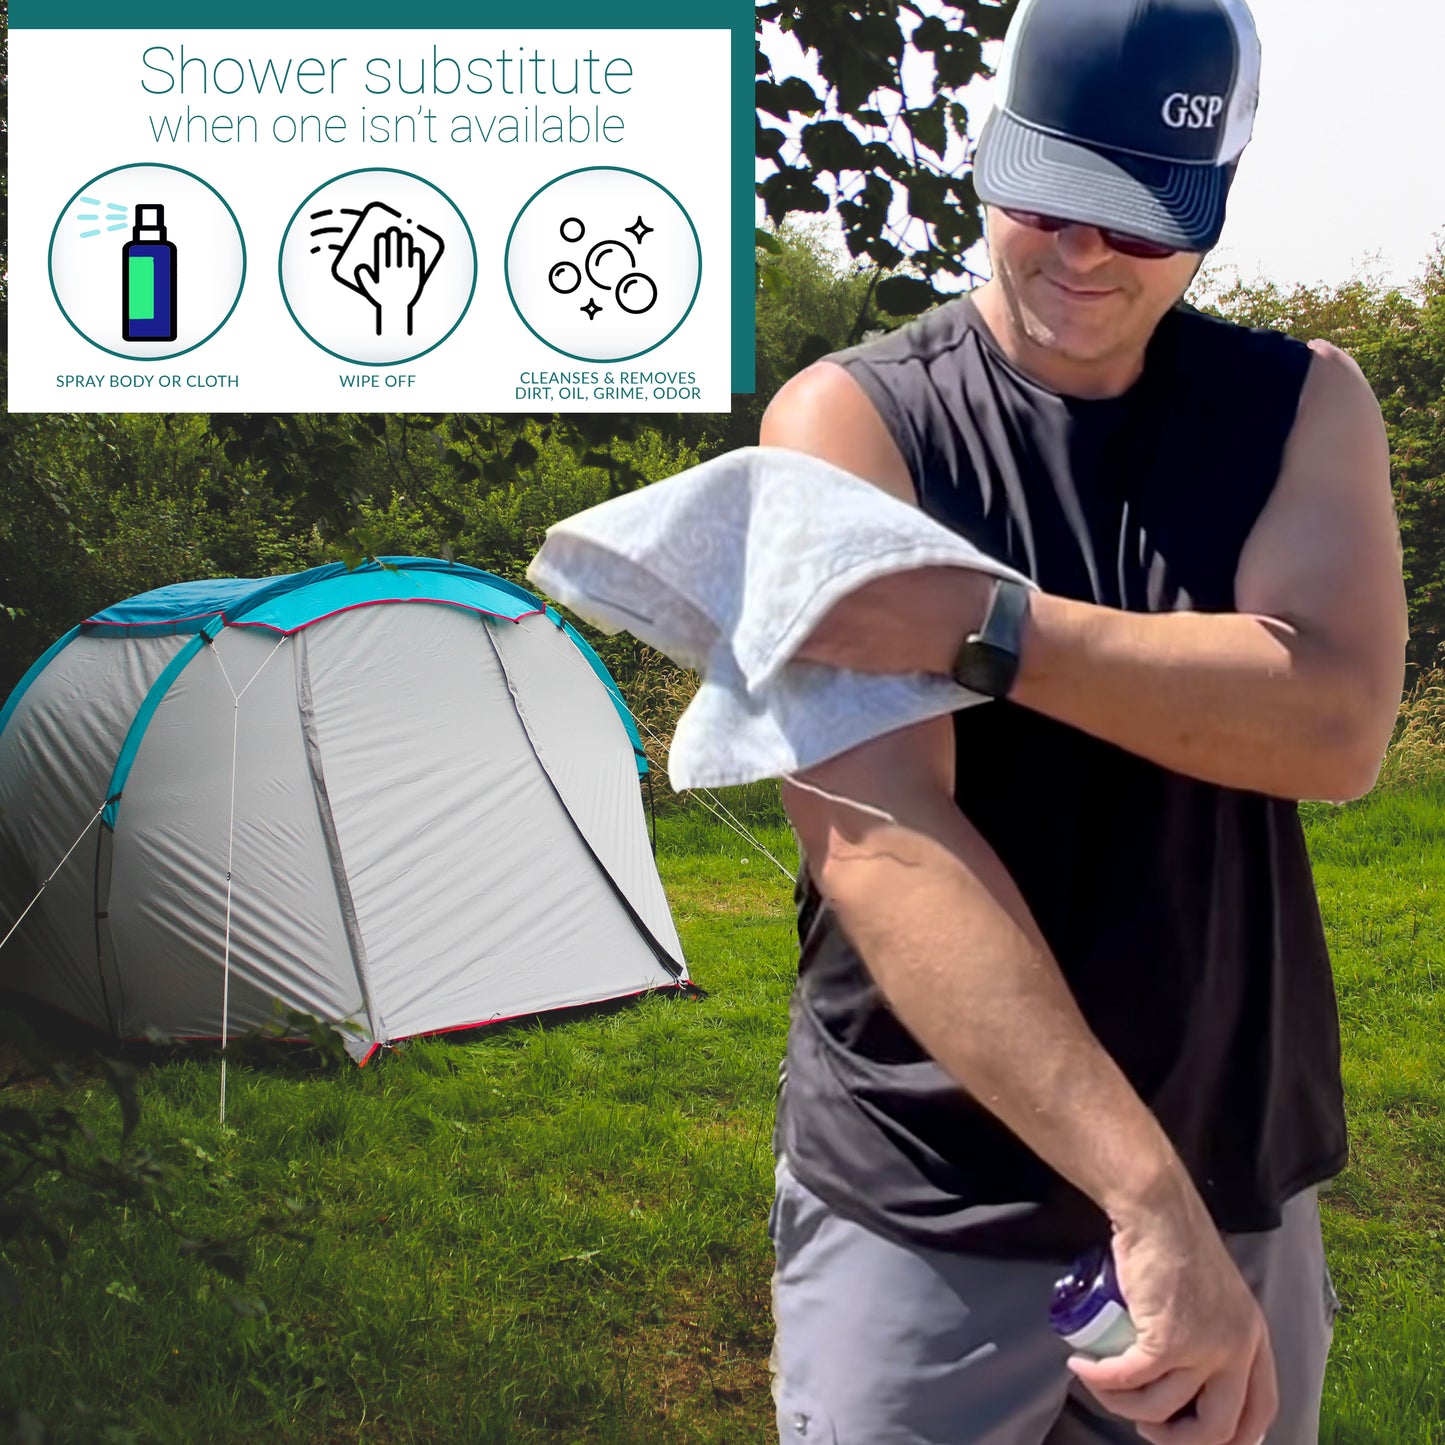 Man wiping arm with Pristine body cleansing spray in front of tent outdoors. Text reads "Shower substitute when one isn't available. Spray body. wipe off. cleansing. removes dirt, oil, grime, odor